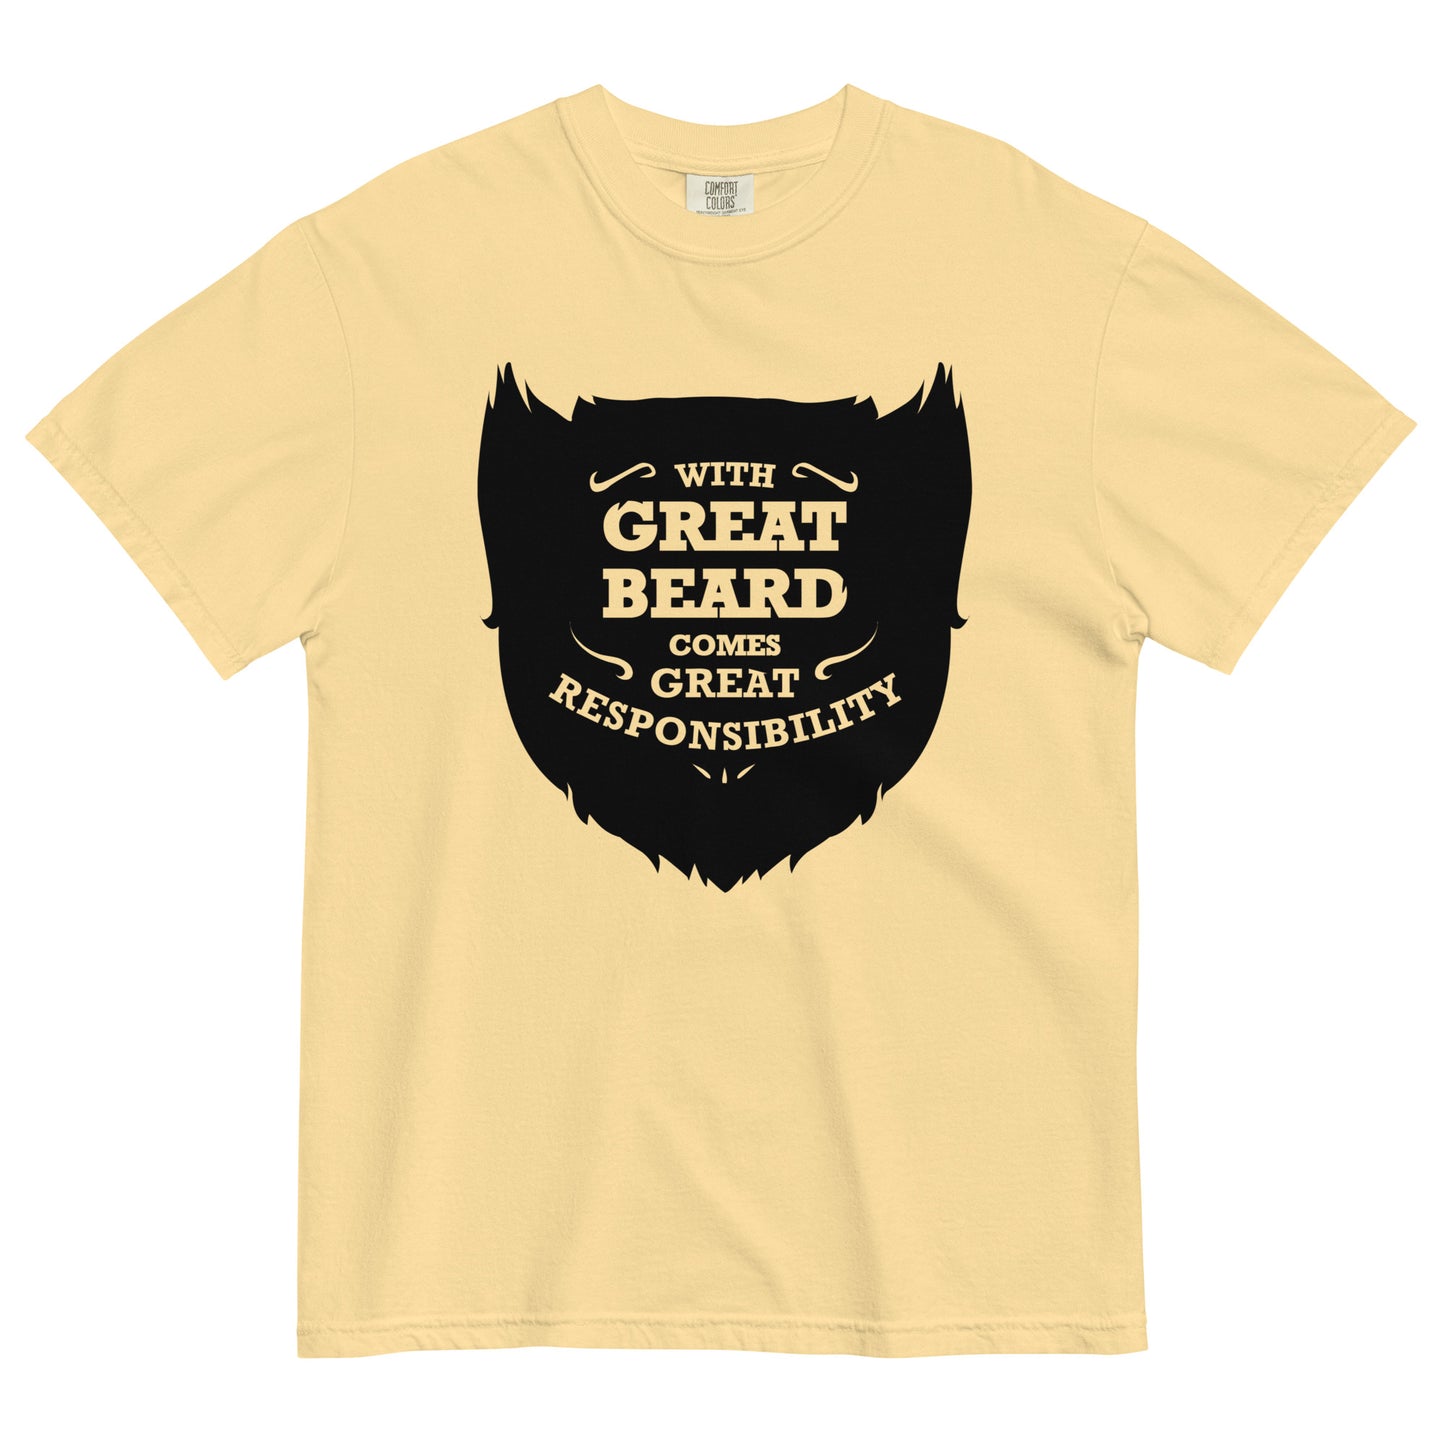 With Great Beard Comes Great Responsibility Men's Relaxed Fit Tee